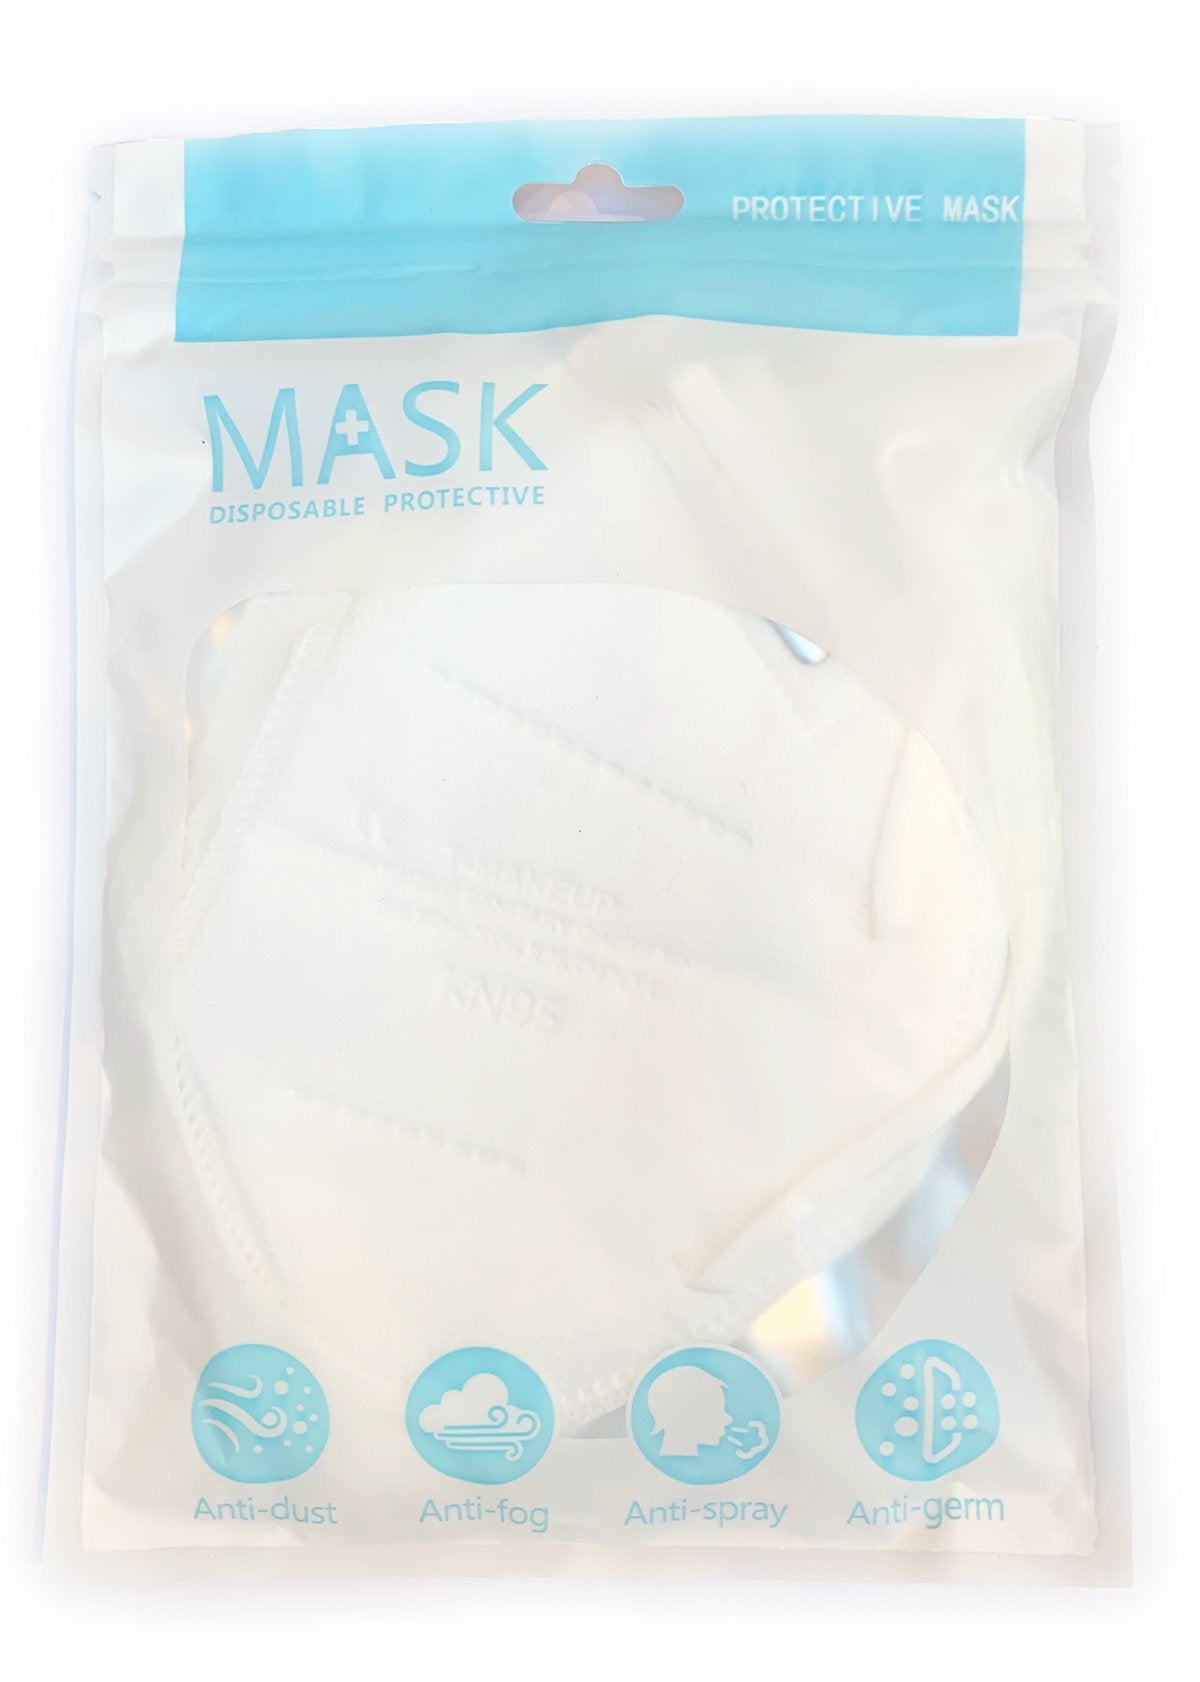 Professional Face Mask for Stylist/Barber N95 KN95 PM2.5 Pack of 10 - Beauty Hair Products Ltd